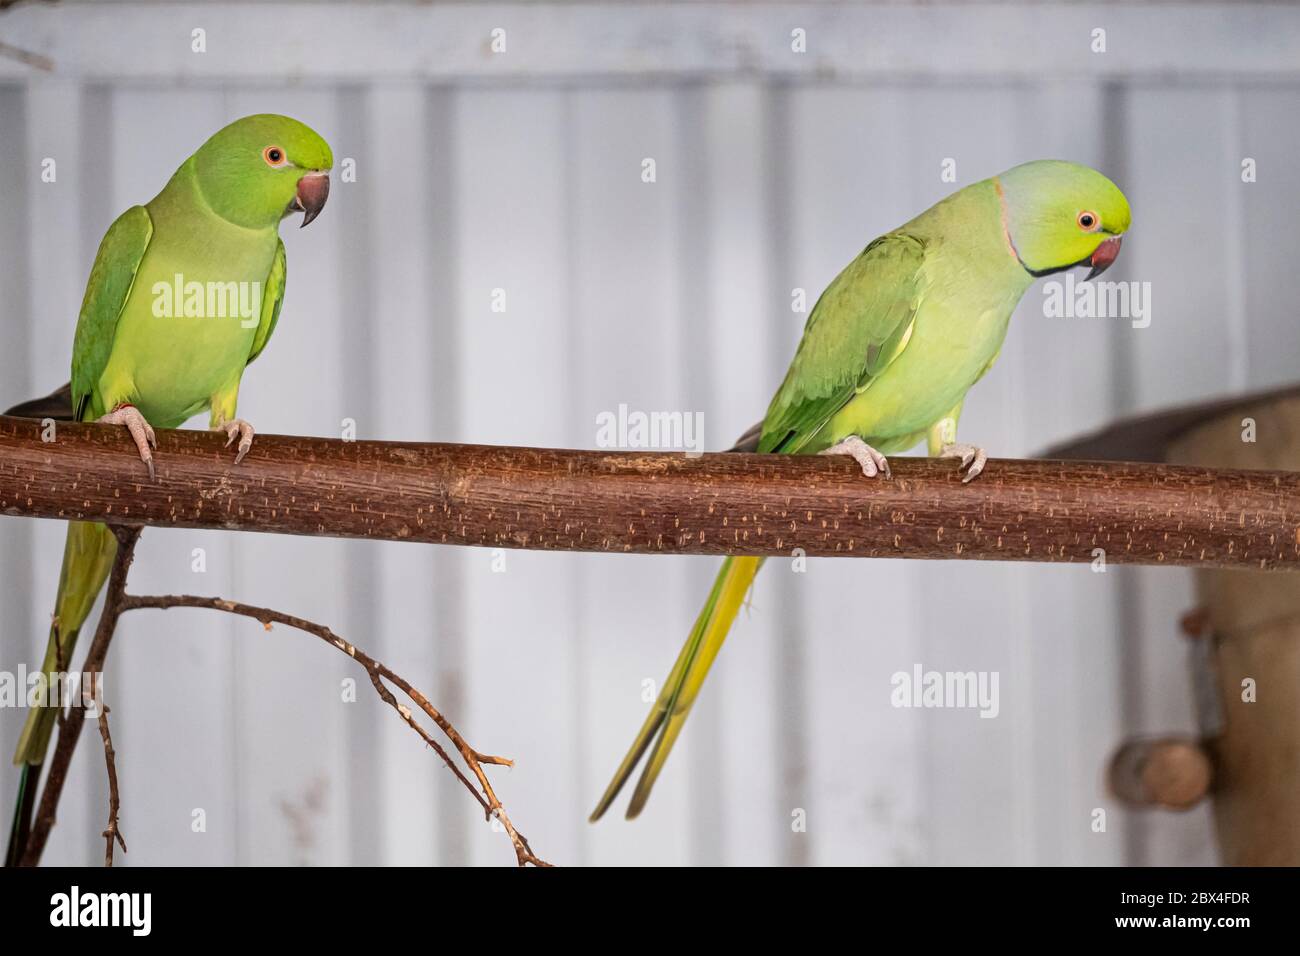 Green parakeet, red beak, sits on a branch. Selective focus Stock Photo